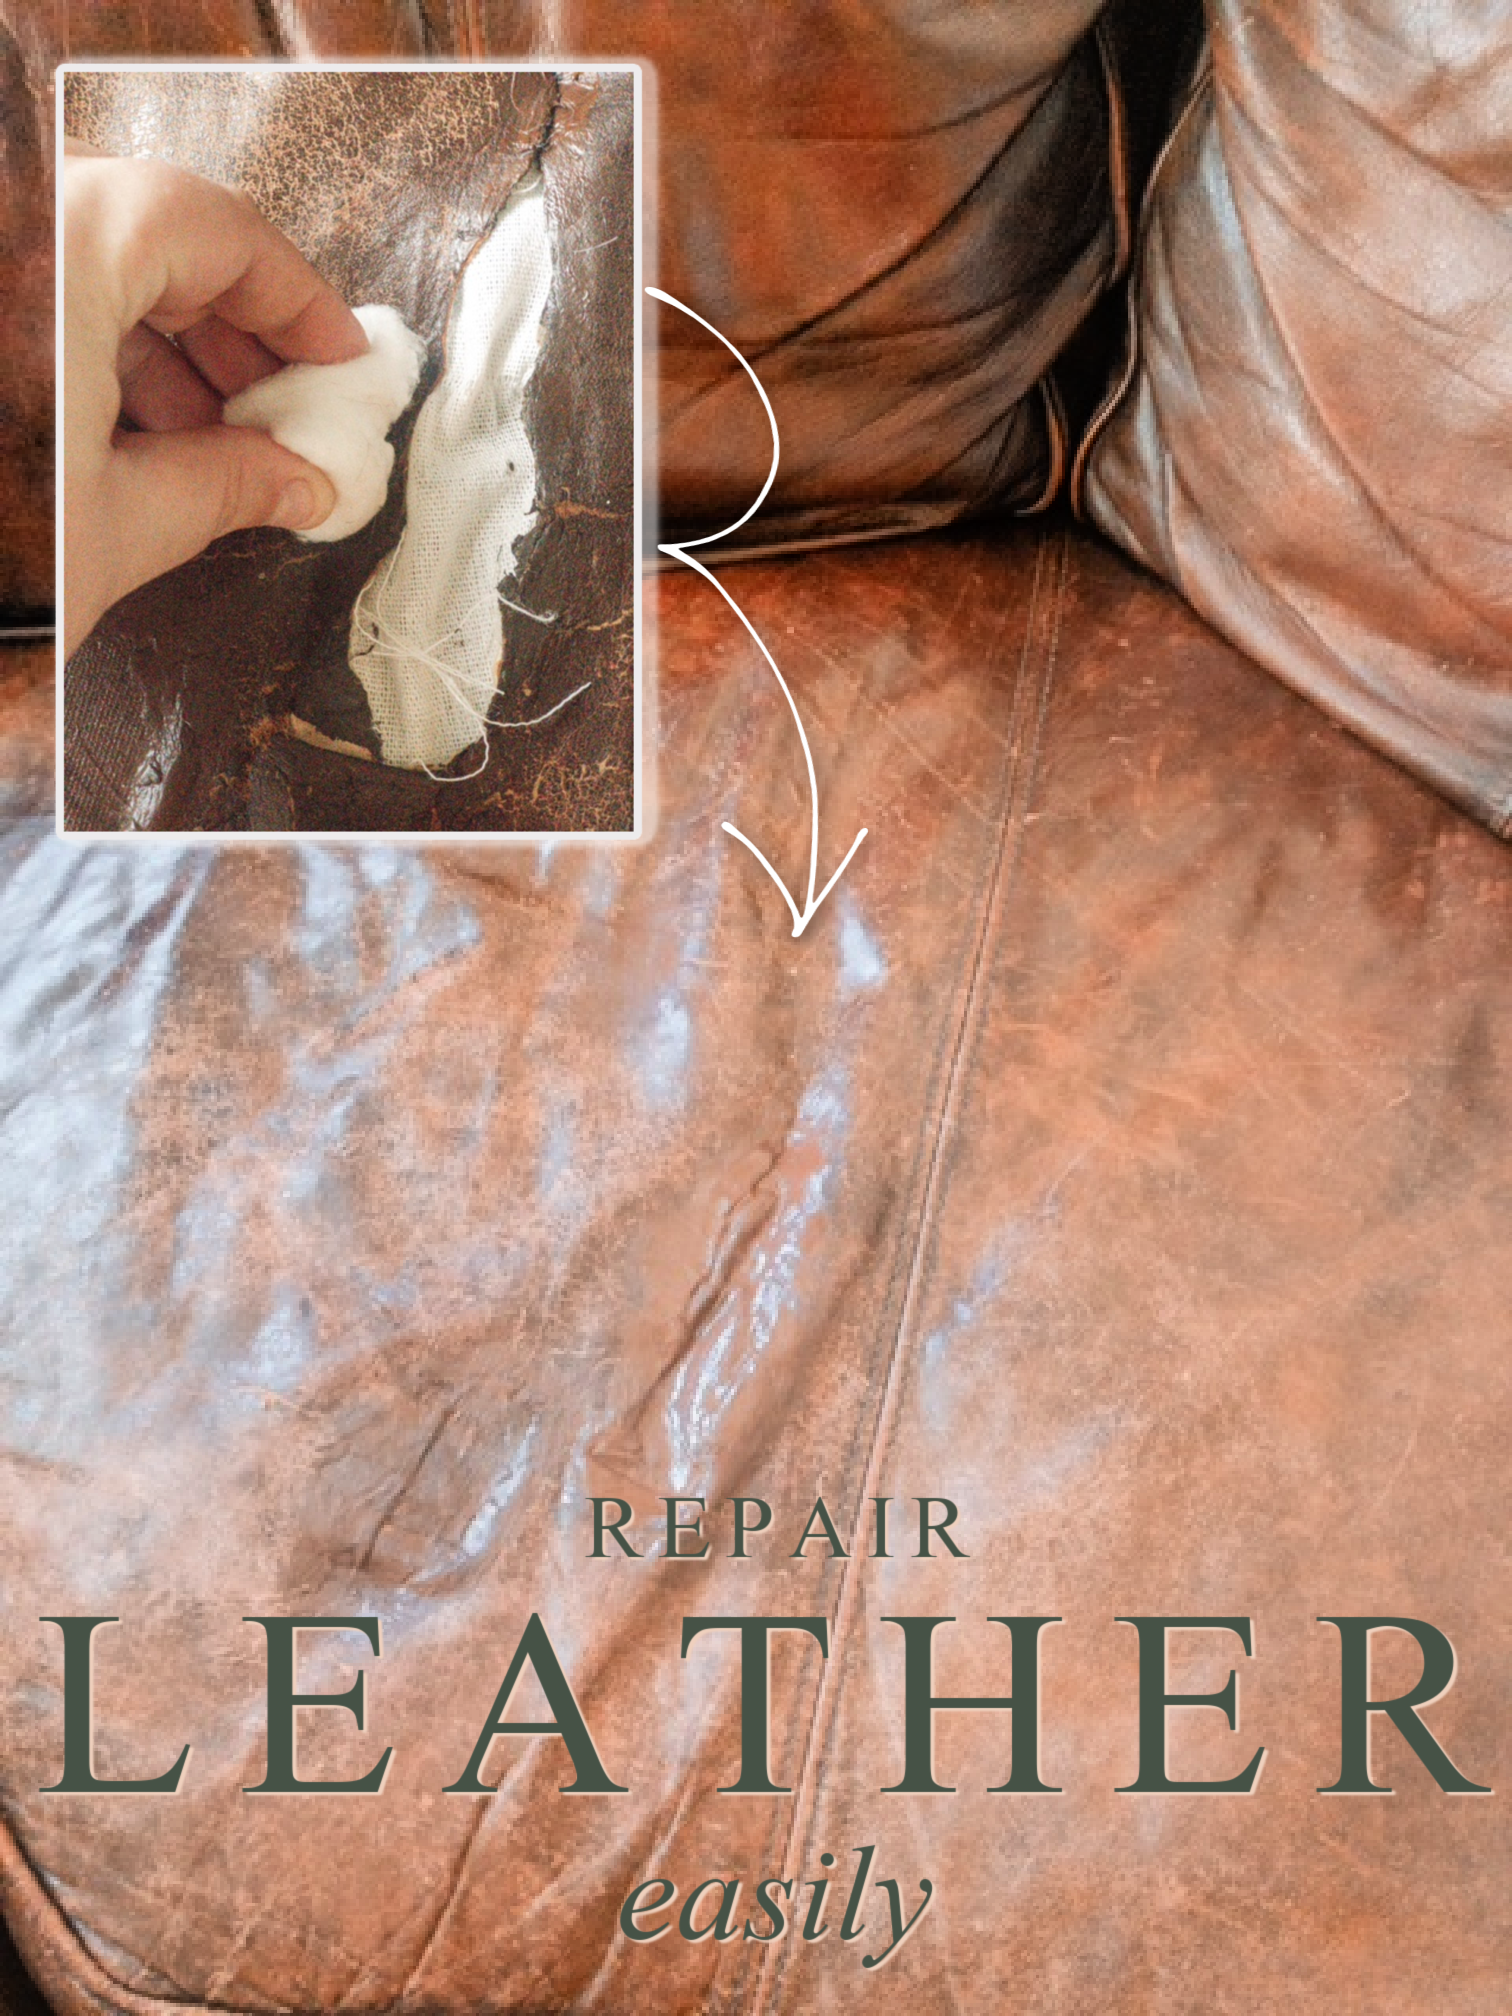 how to repair leather easily | repairing a leather couch